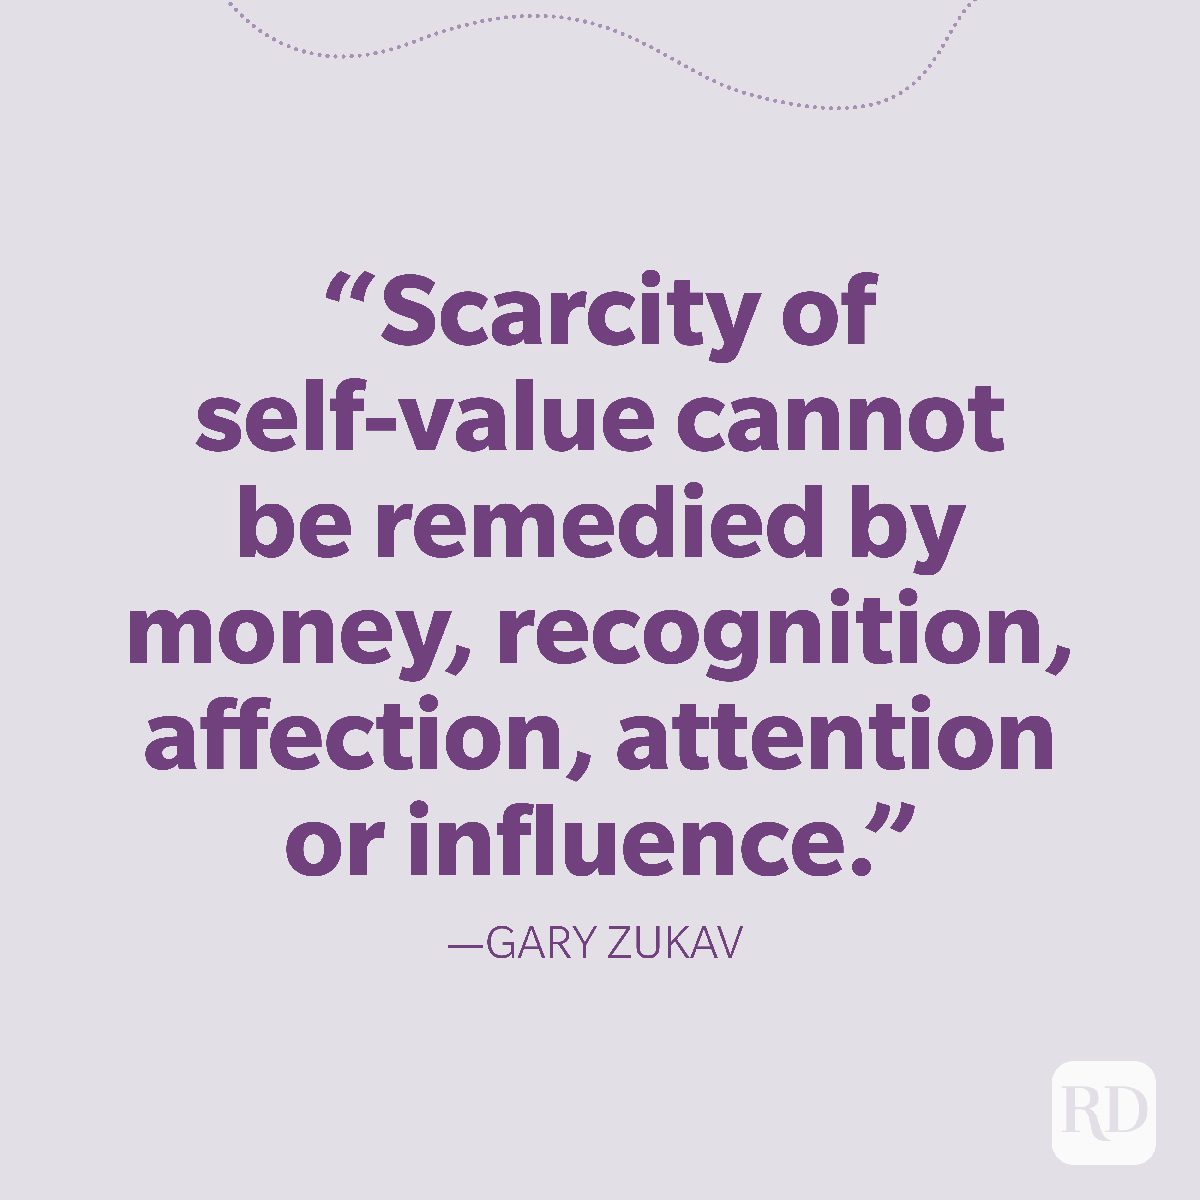 36-Scarcity of self-value cannot be remedied by money, recognition, affection, attention or influence